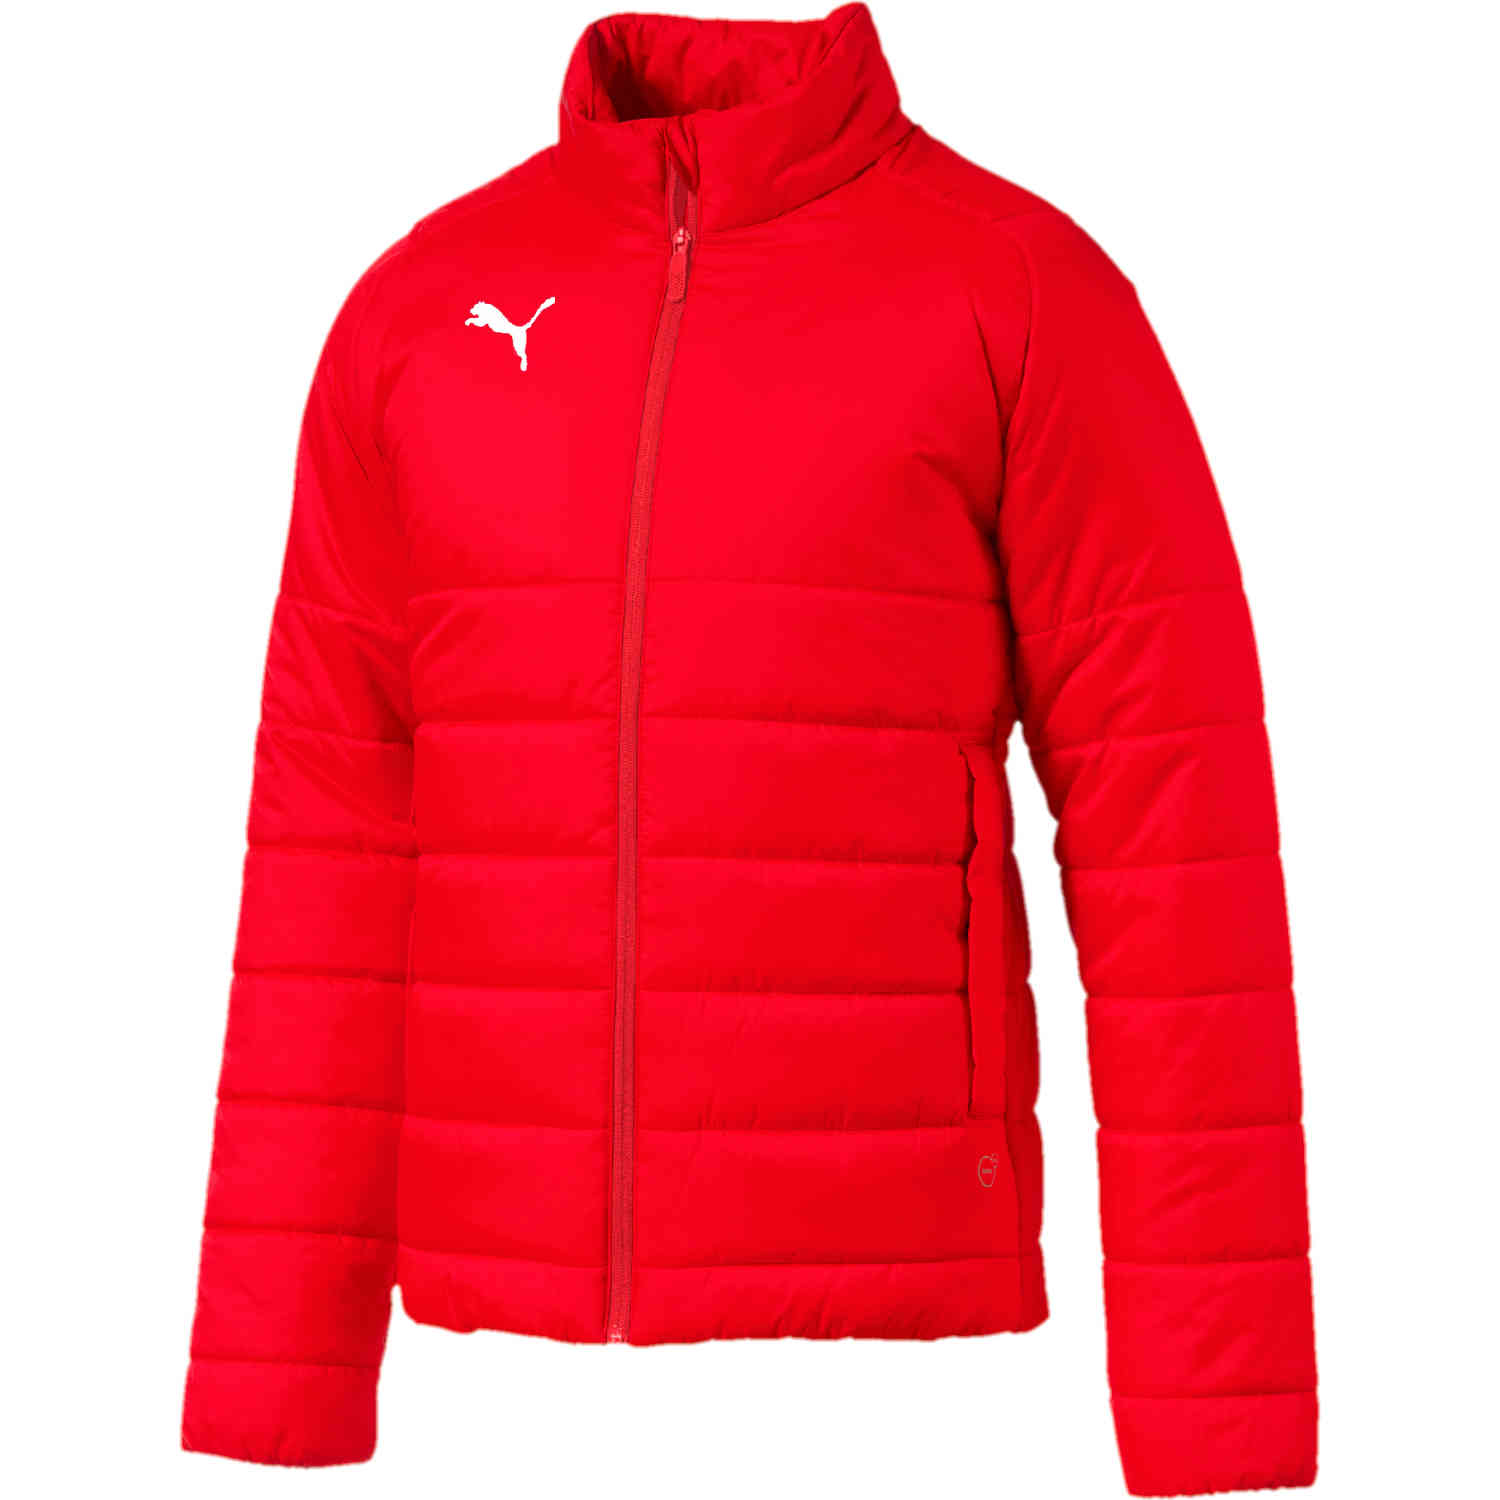 Puma Casuals Padded Jacket - Red - SoccerPro